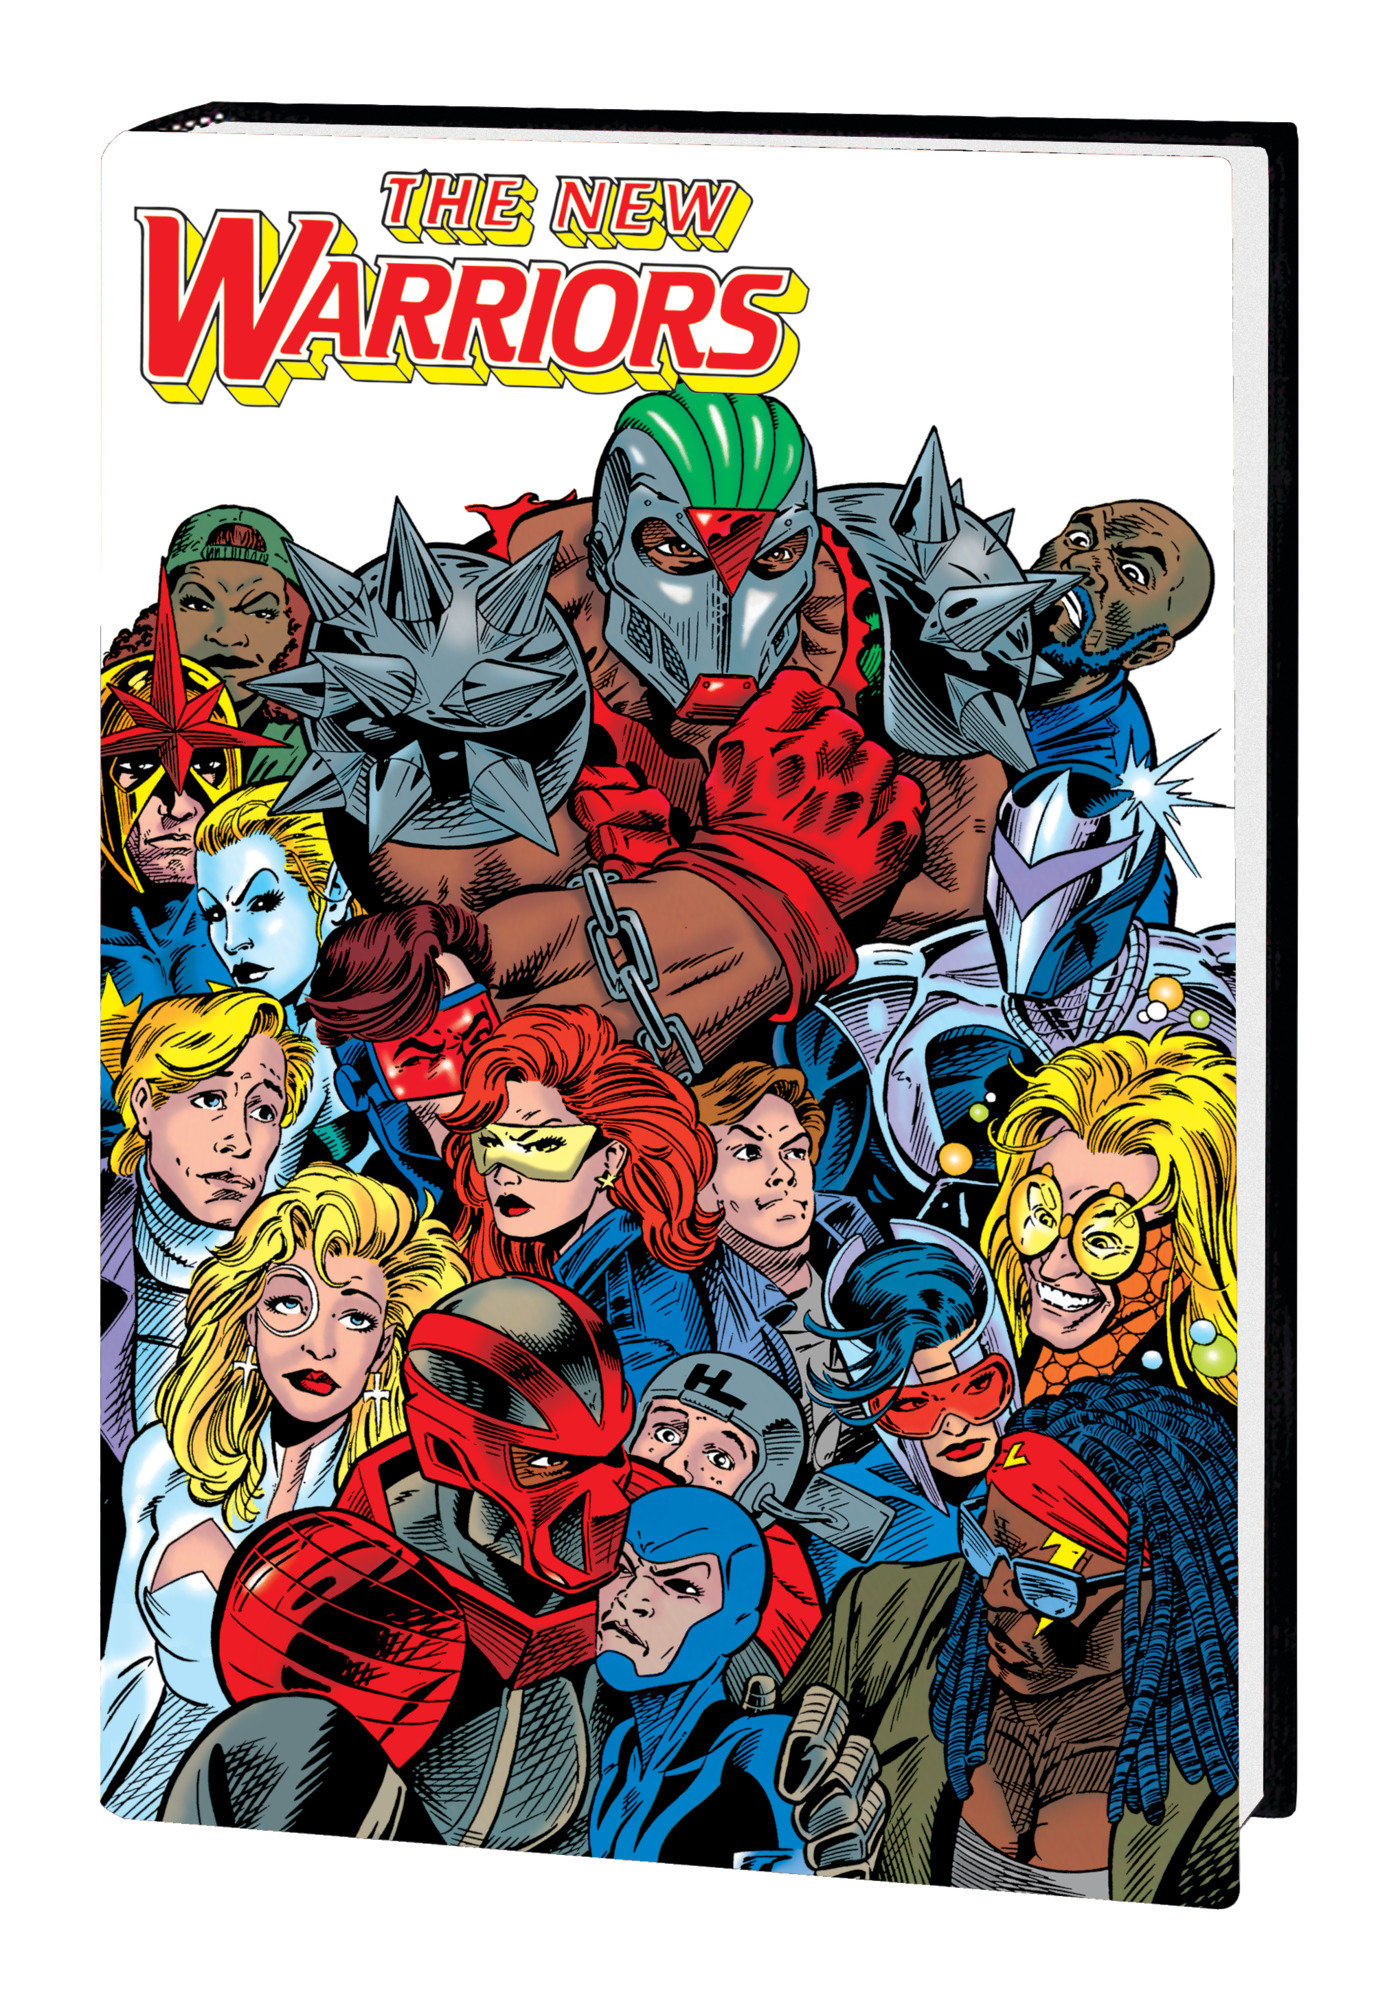 New Warriors Classic Omnibus Hardcover Volume 2 Pace Direct Market Edition